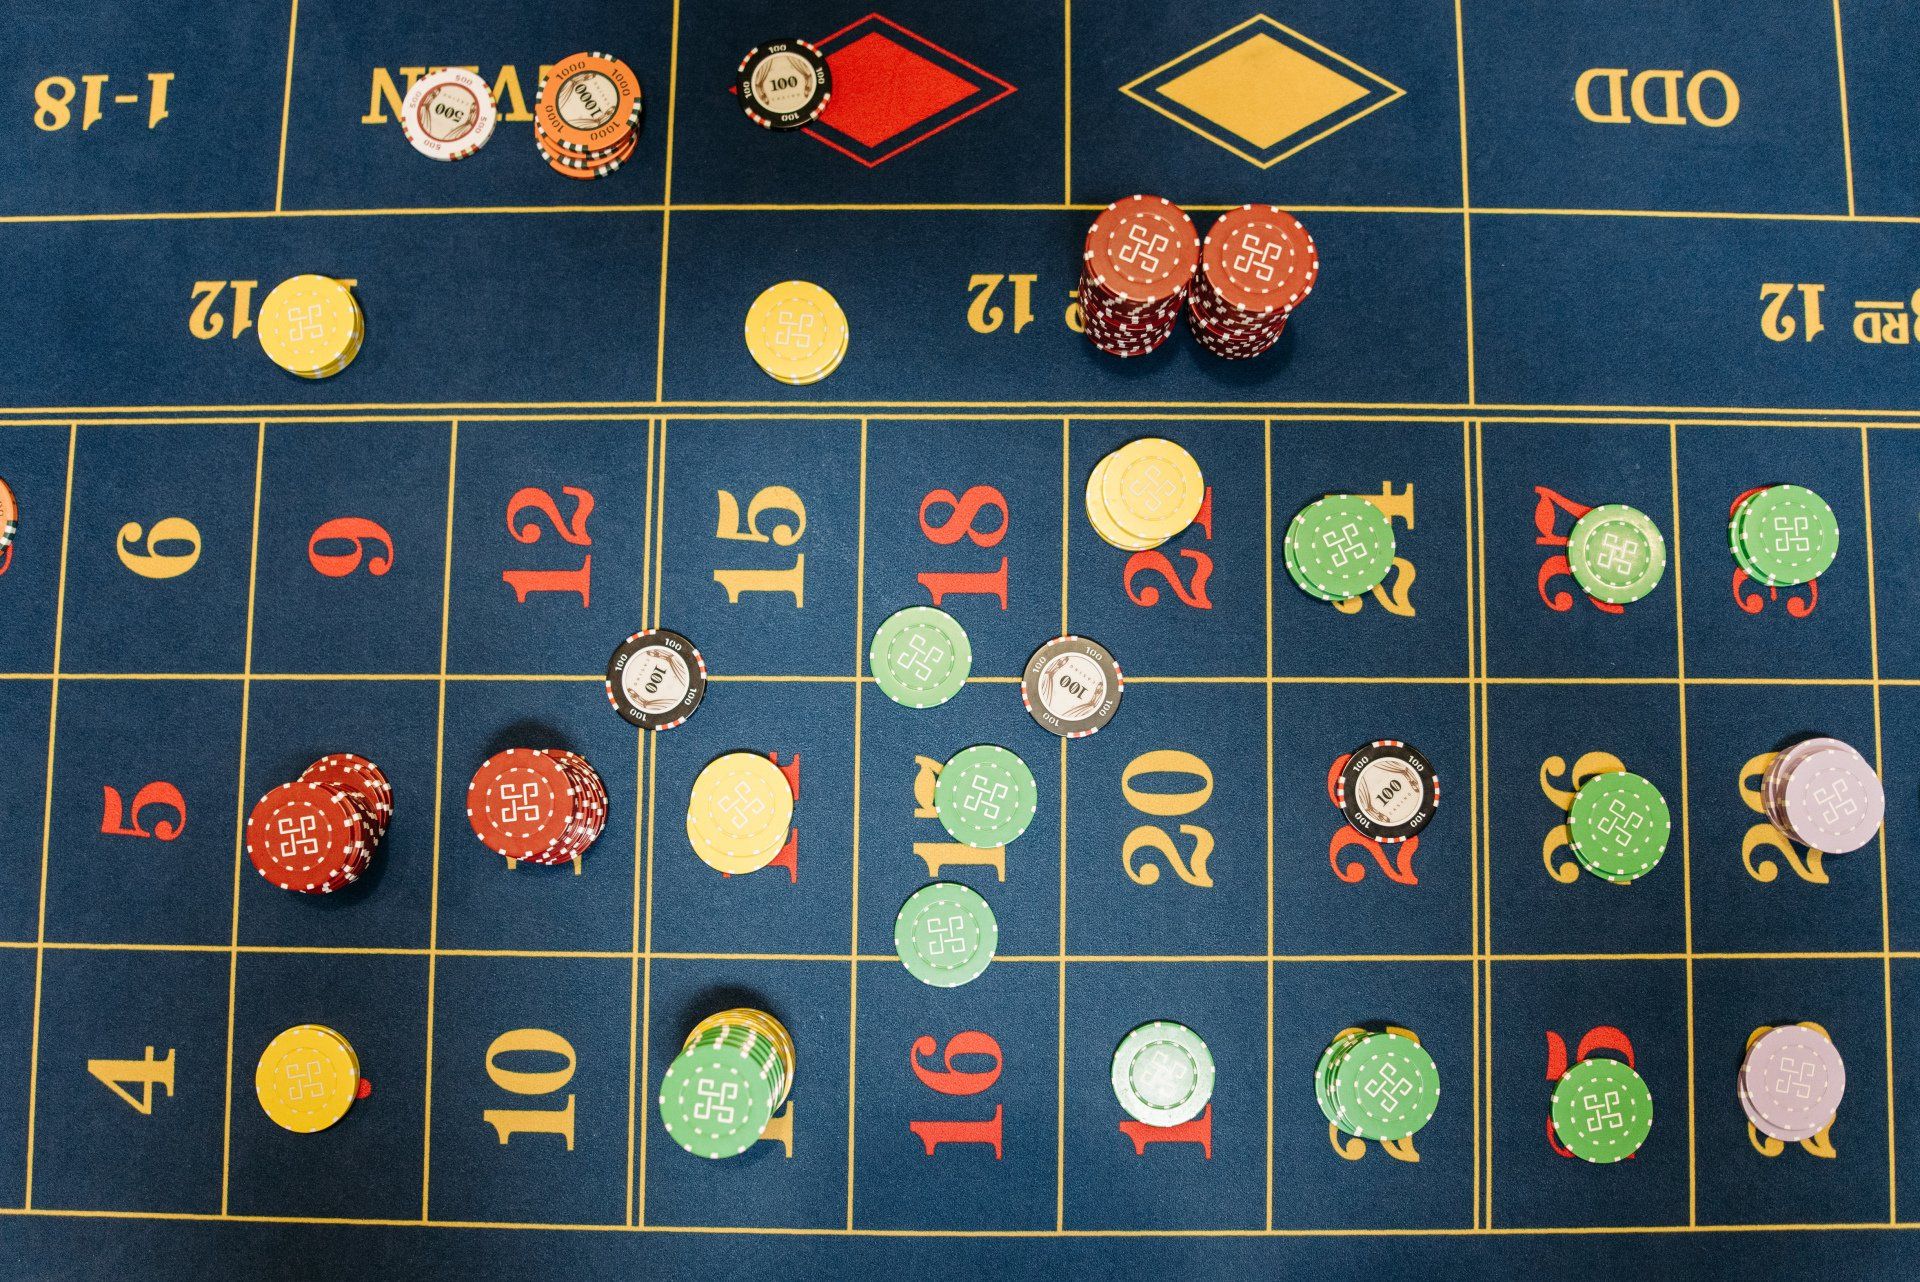 Image of a roulette table